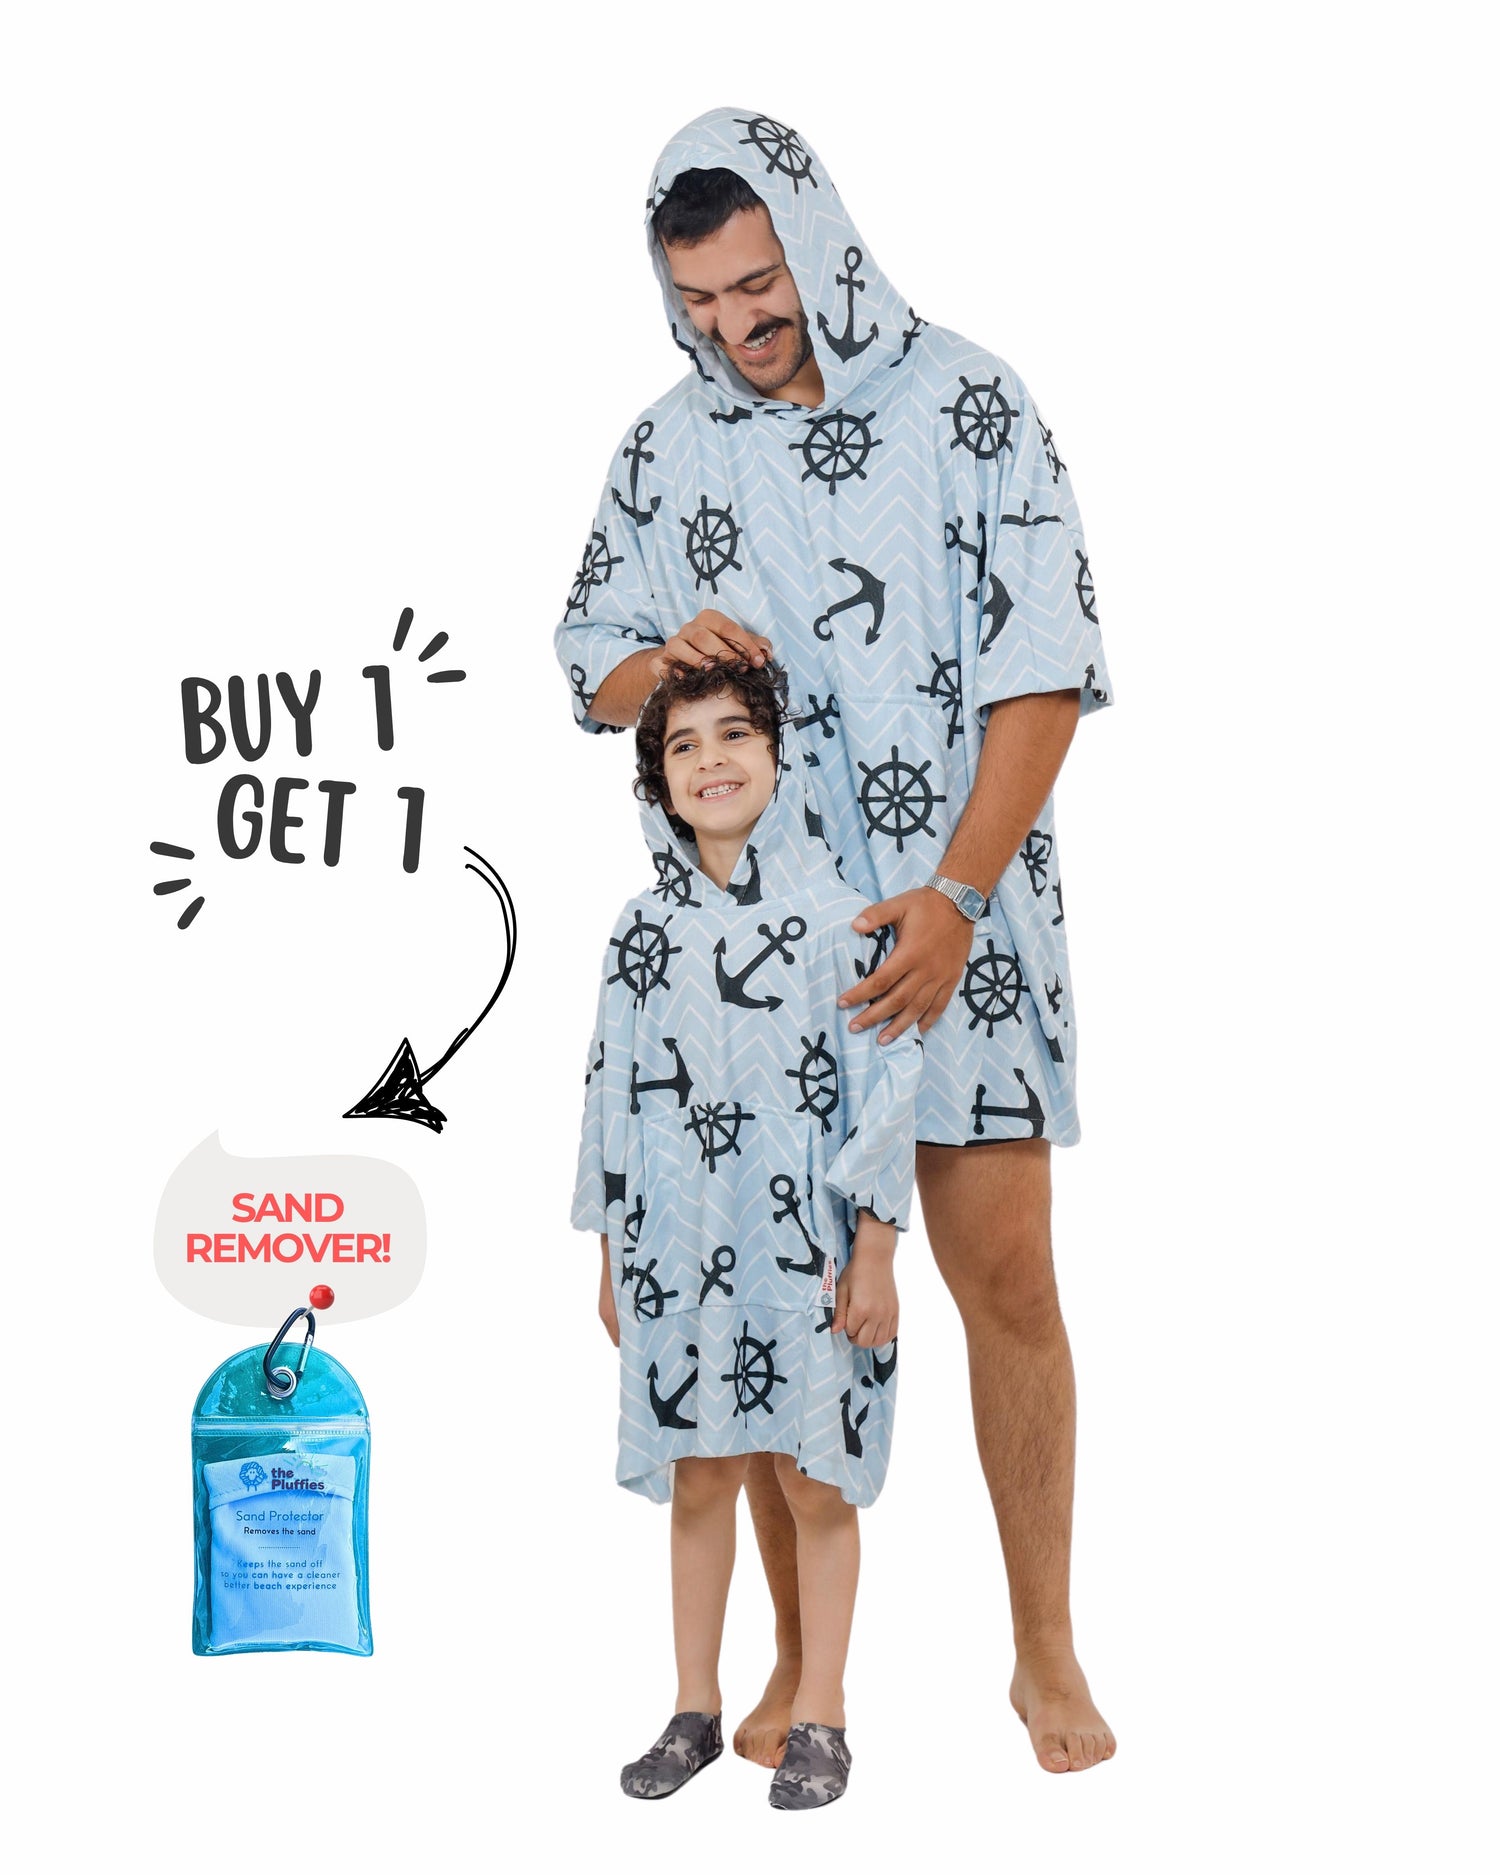 You & Mini You Poncho Towels + 2 FREE Sand Remover